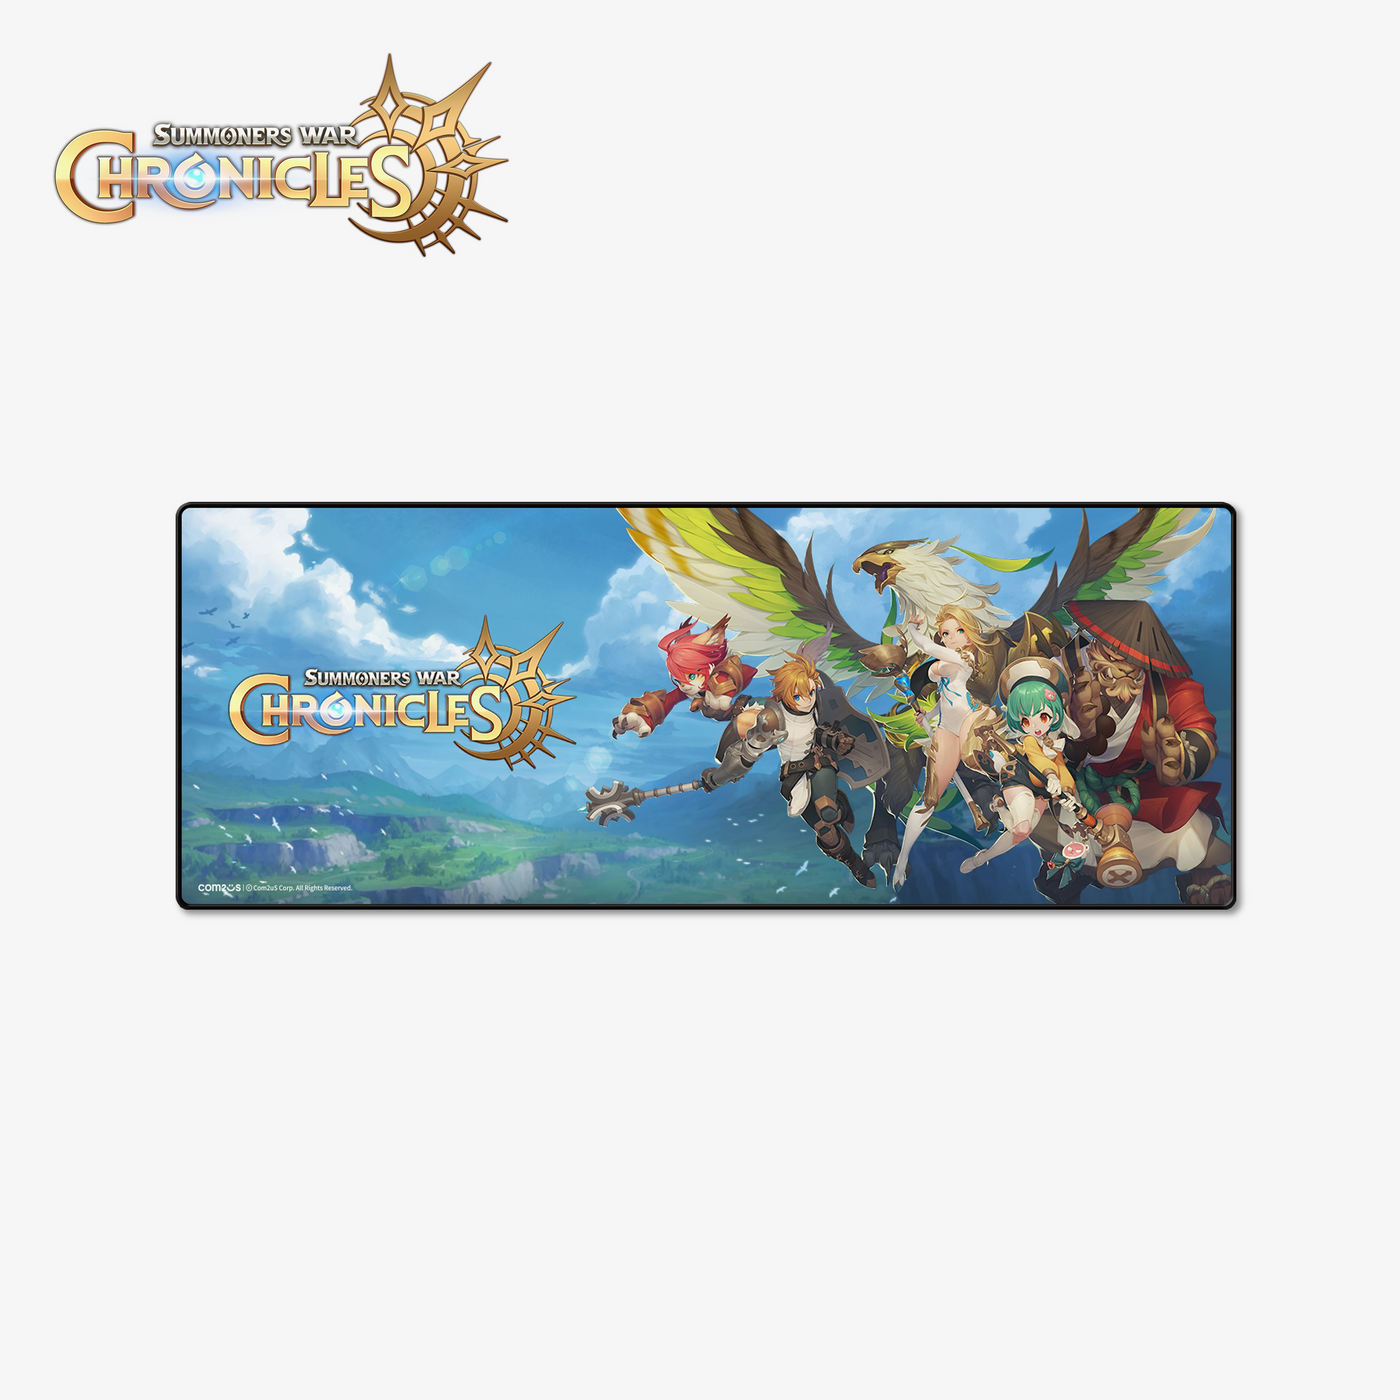 [Summoners War: Chronicles] Large Mouse Pad (Key Artwork 01)